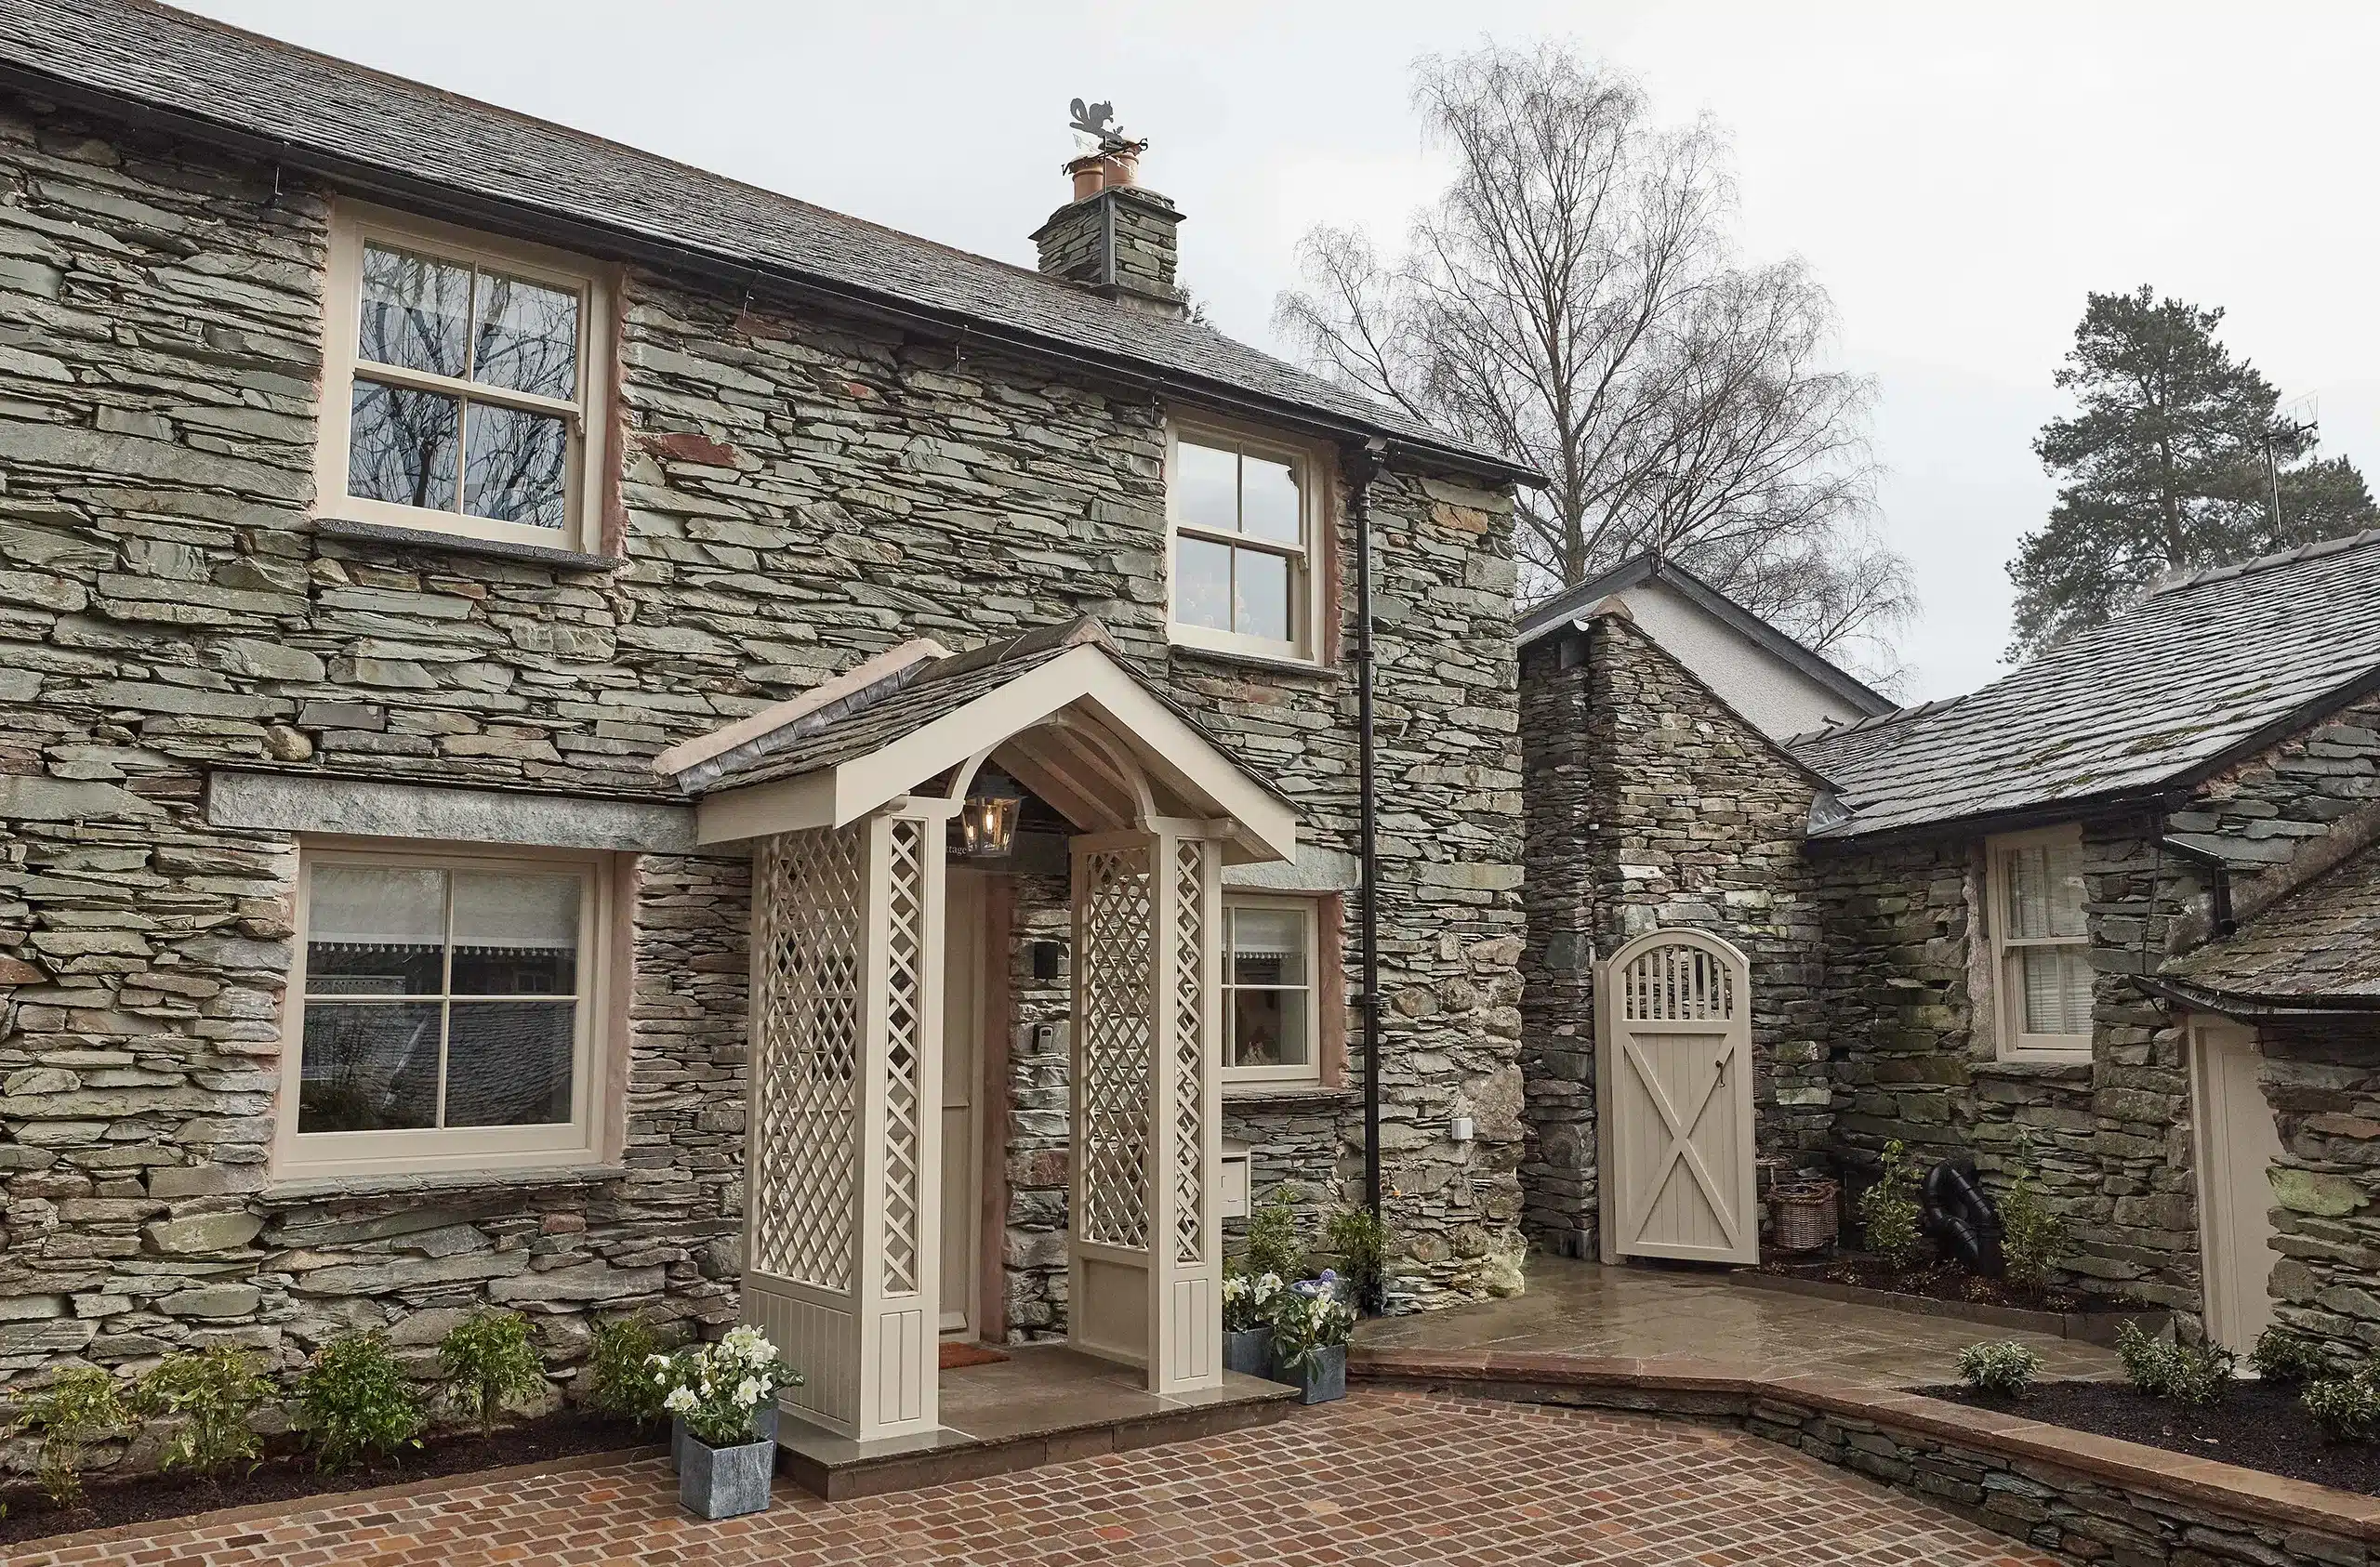 Little Nut Cottage, luxury accommodation by interior designer katharine pooley in the lake district